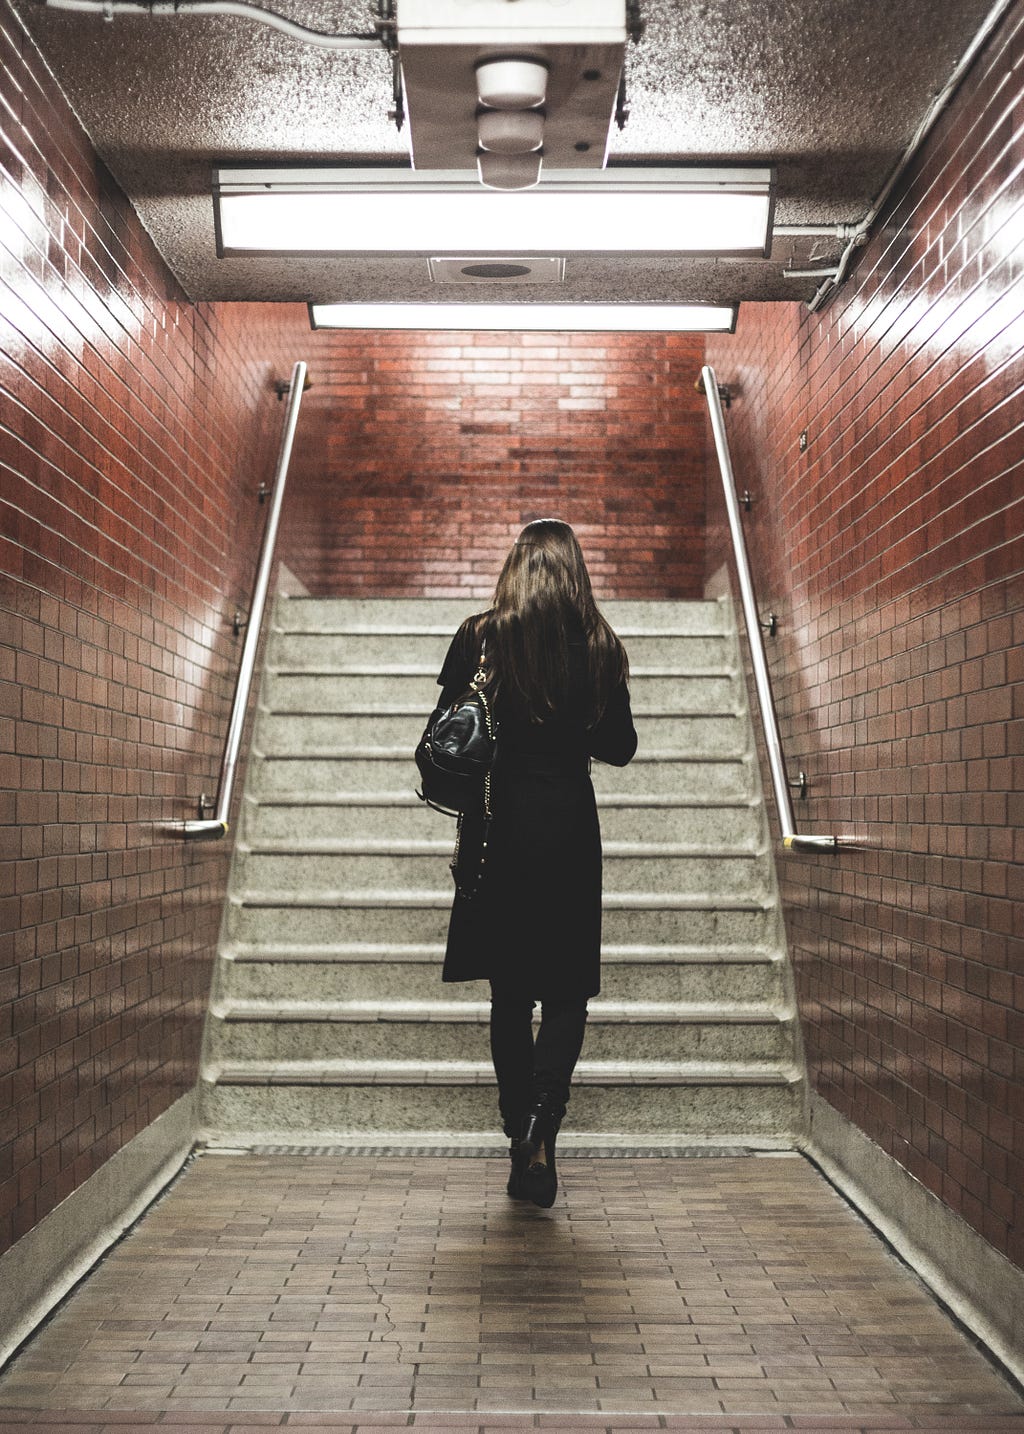 Image of a woman walking away, long hair, black outfit, black purse, heading towards stairs. This might be an underground subway or train station.